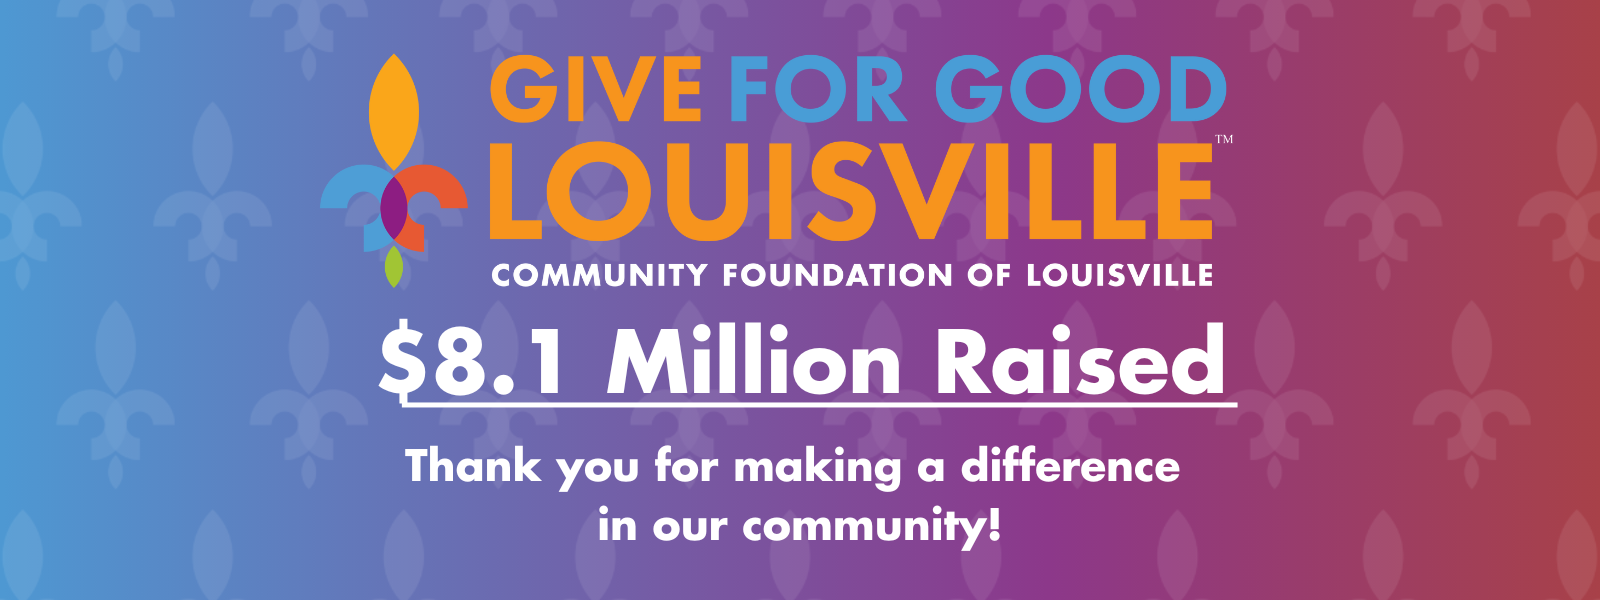 Give for Good Louisville 2022 - Thank you for supporting our community! $8.1 Million Raised.